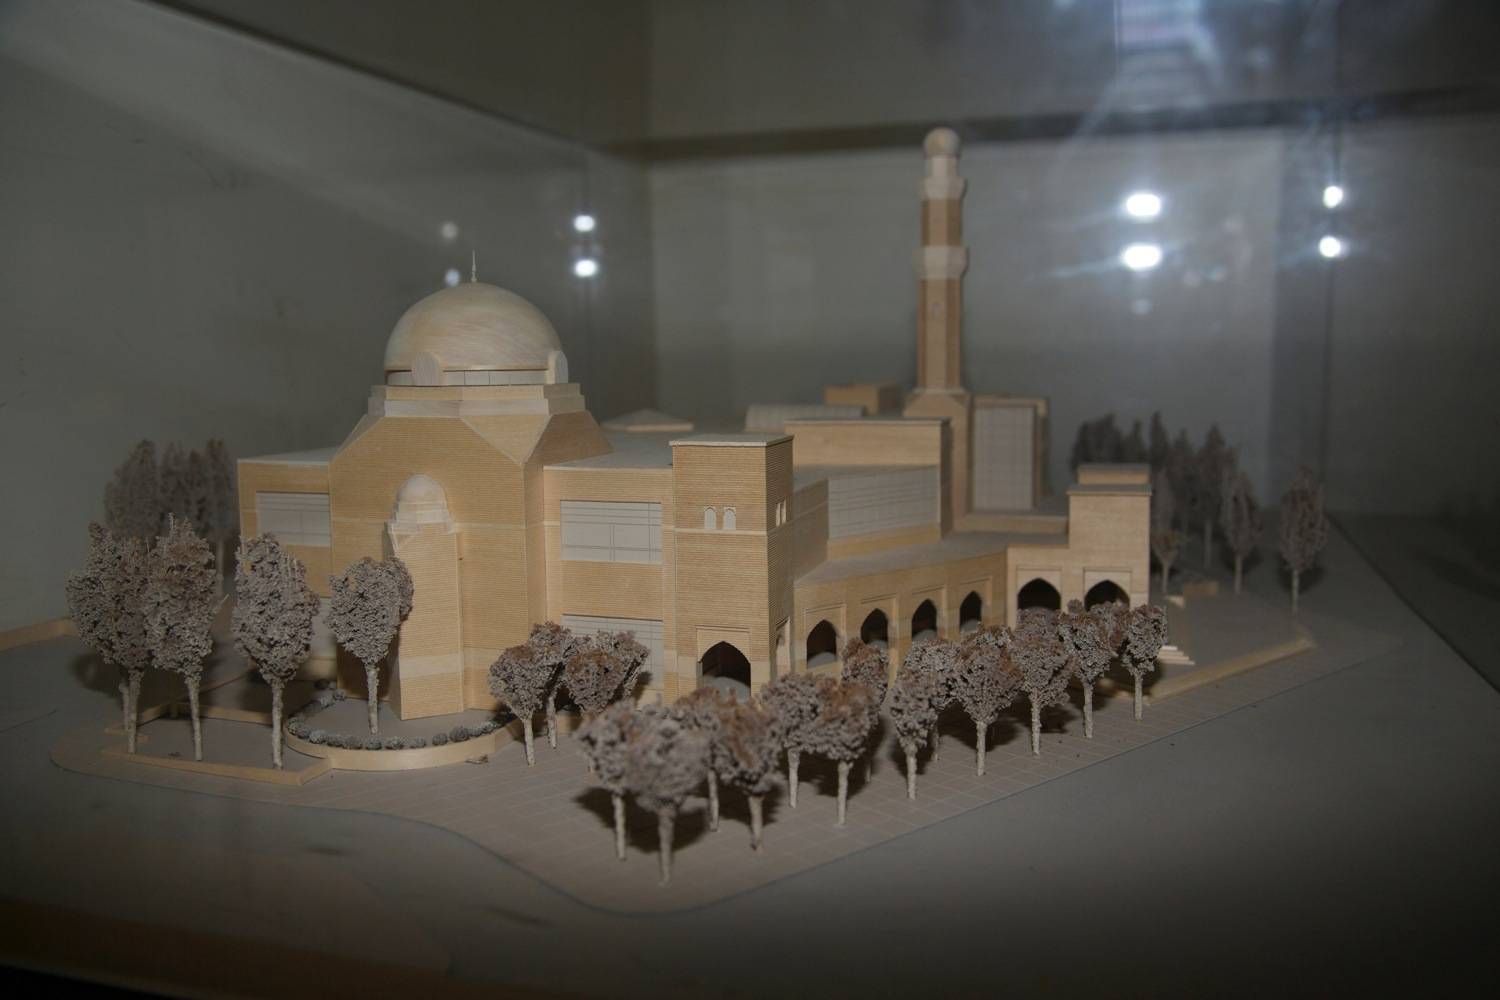 View of the architect's model